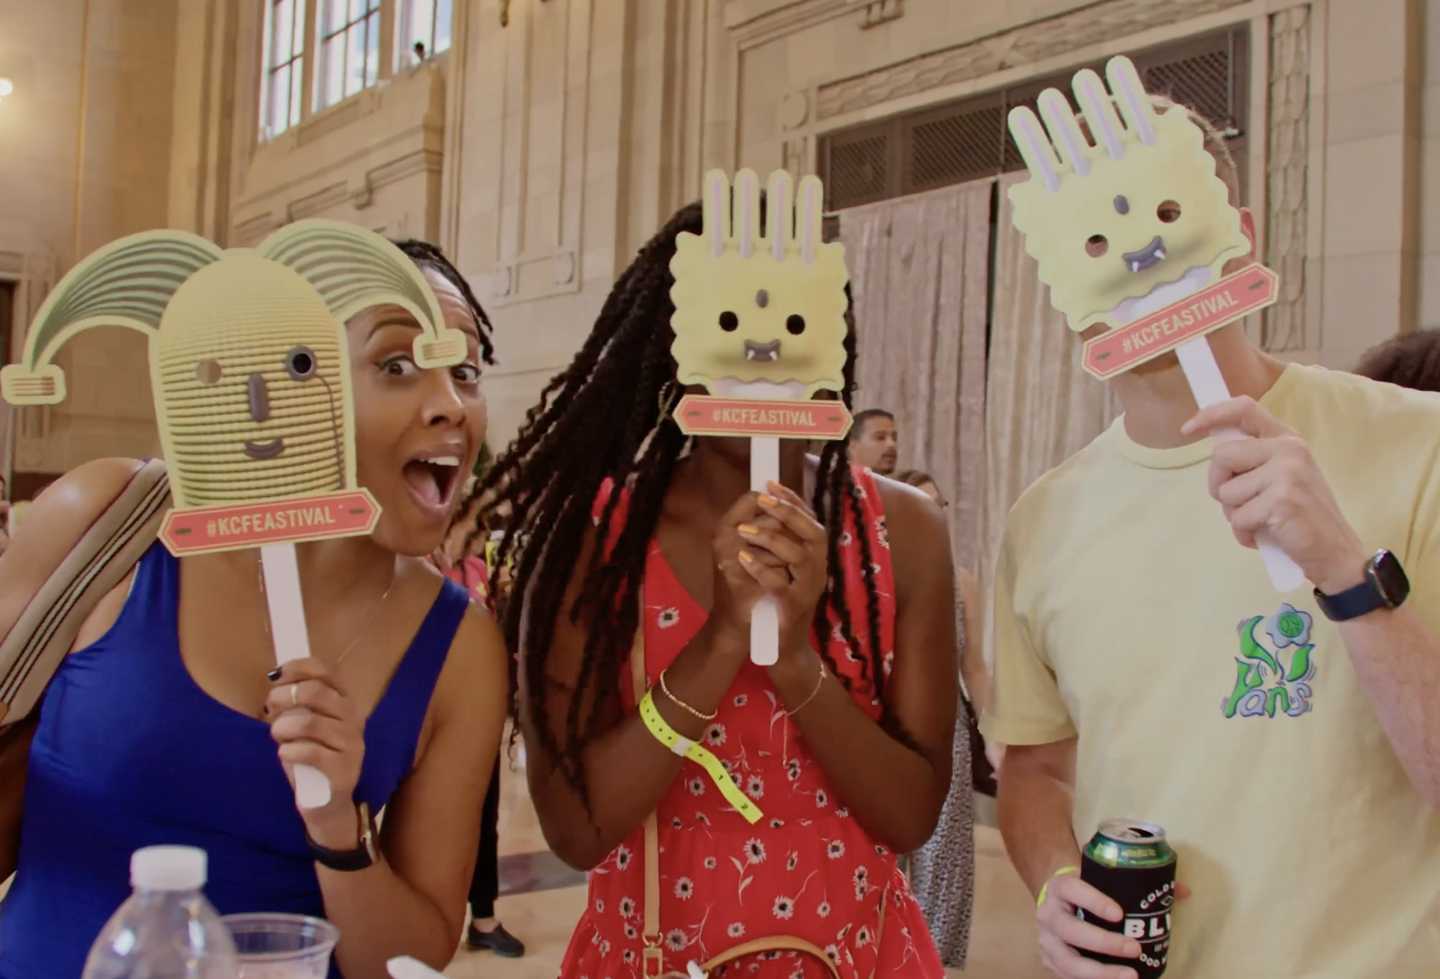 Three people at Feastival event holding up different hunger monster-head masks